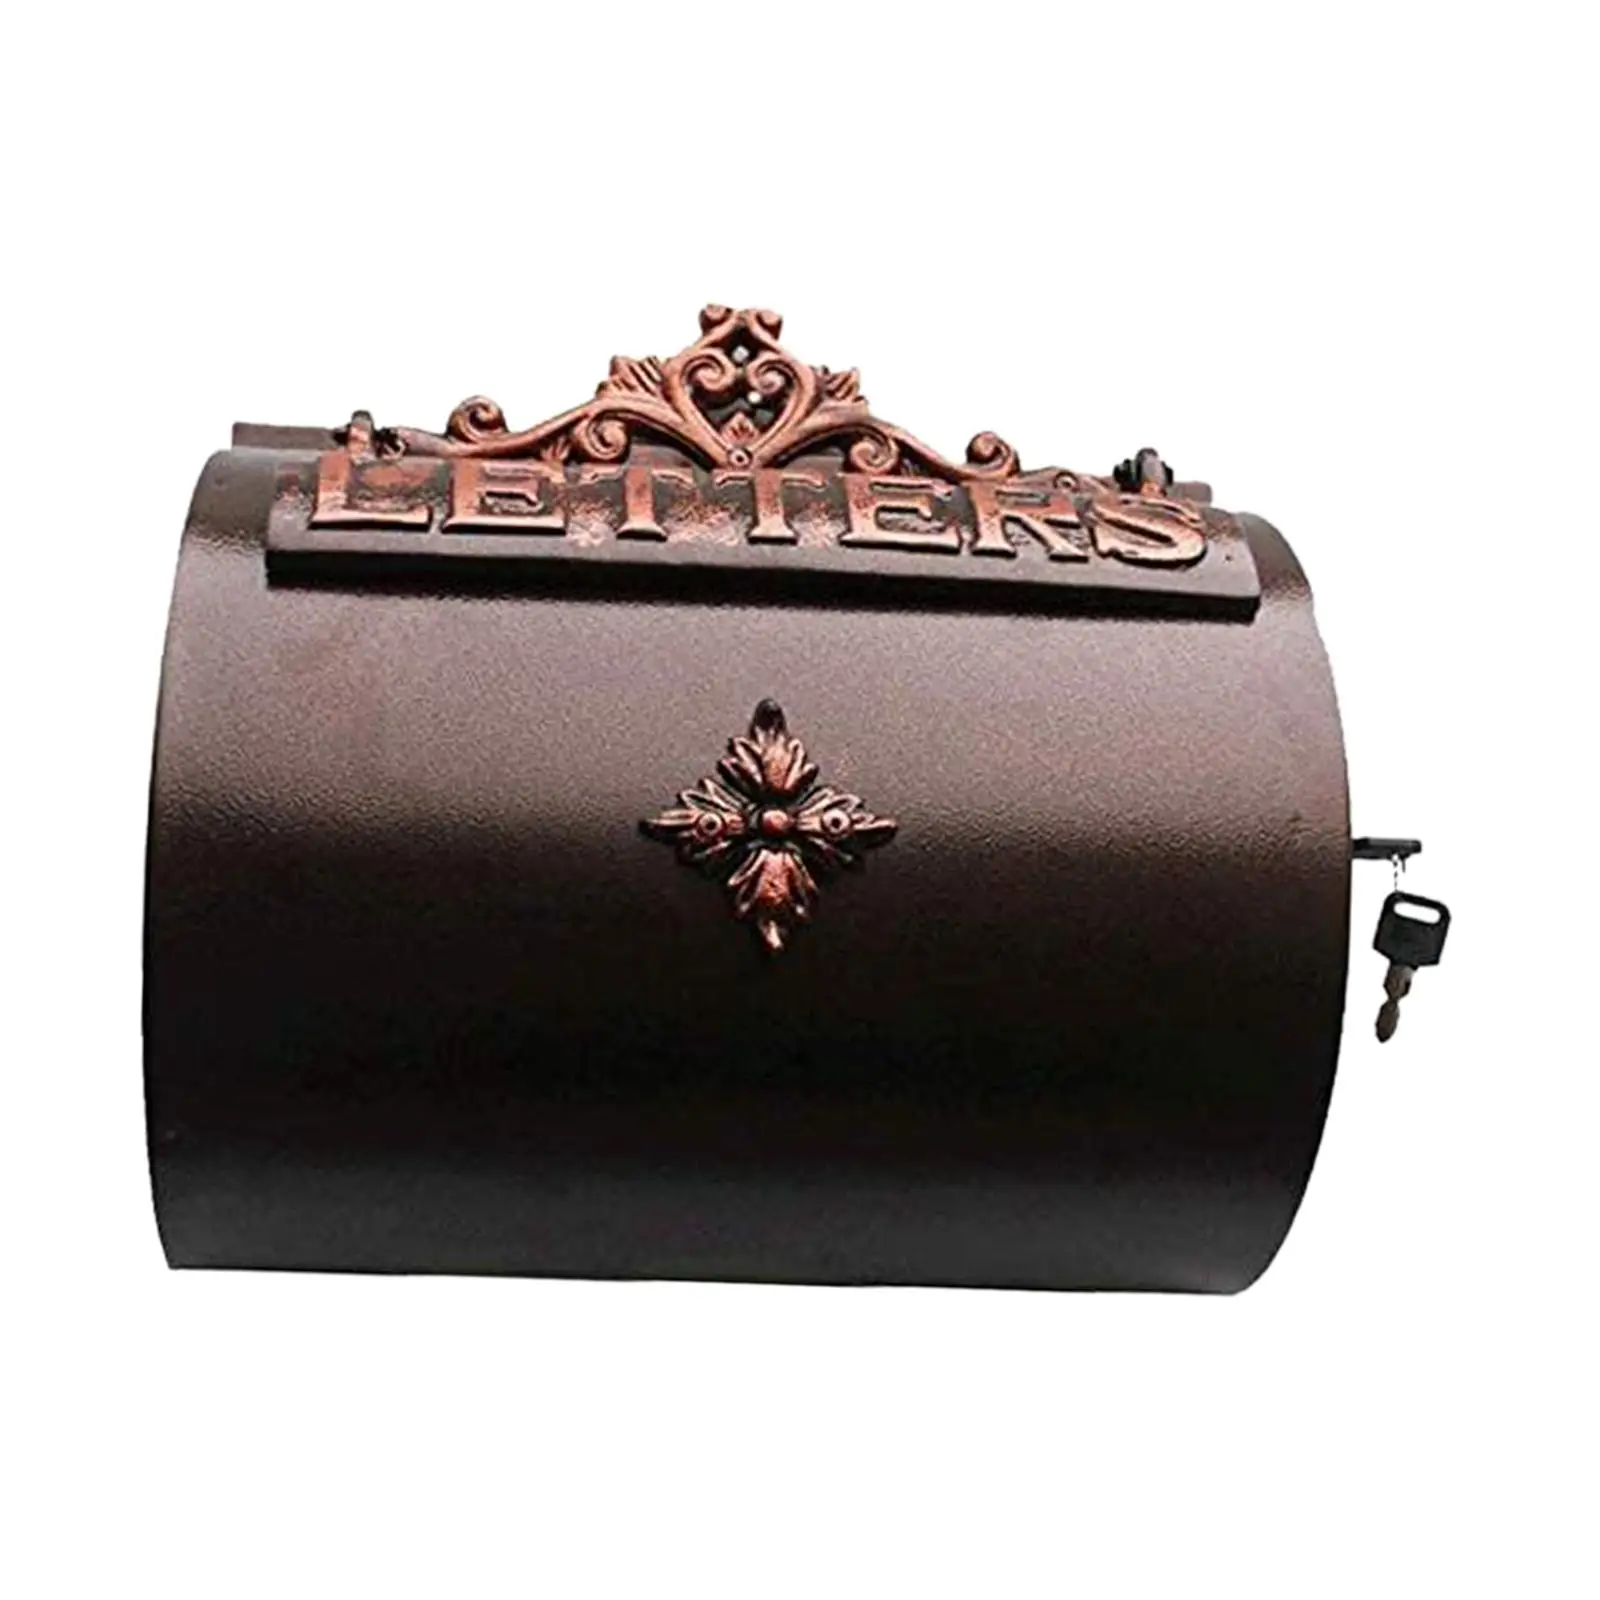 

Vintage Cast Iron Locking Mailbox with Key Lock Retro Residential Mail Box Villa Outdoor Letter Box Wall Mount Locking Mailboxes